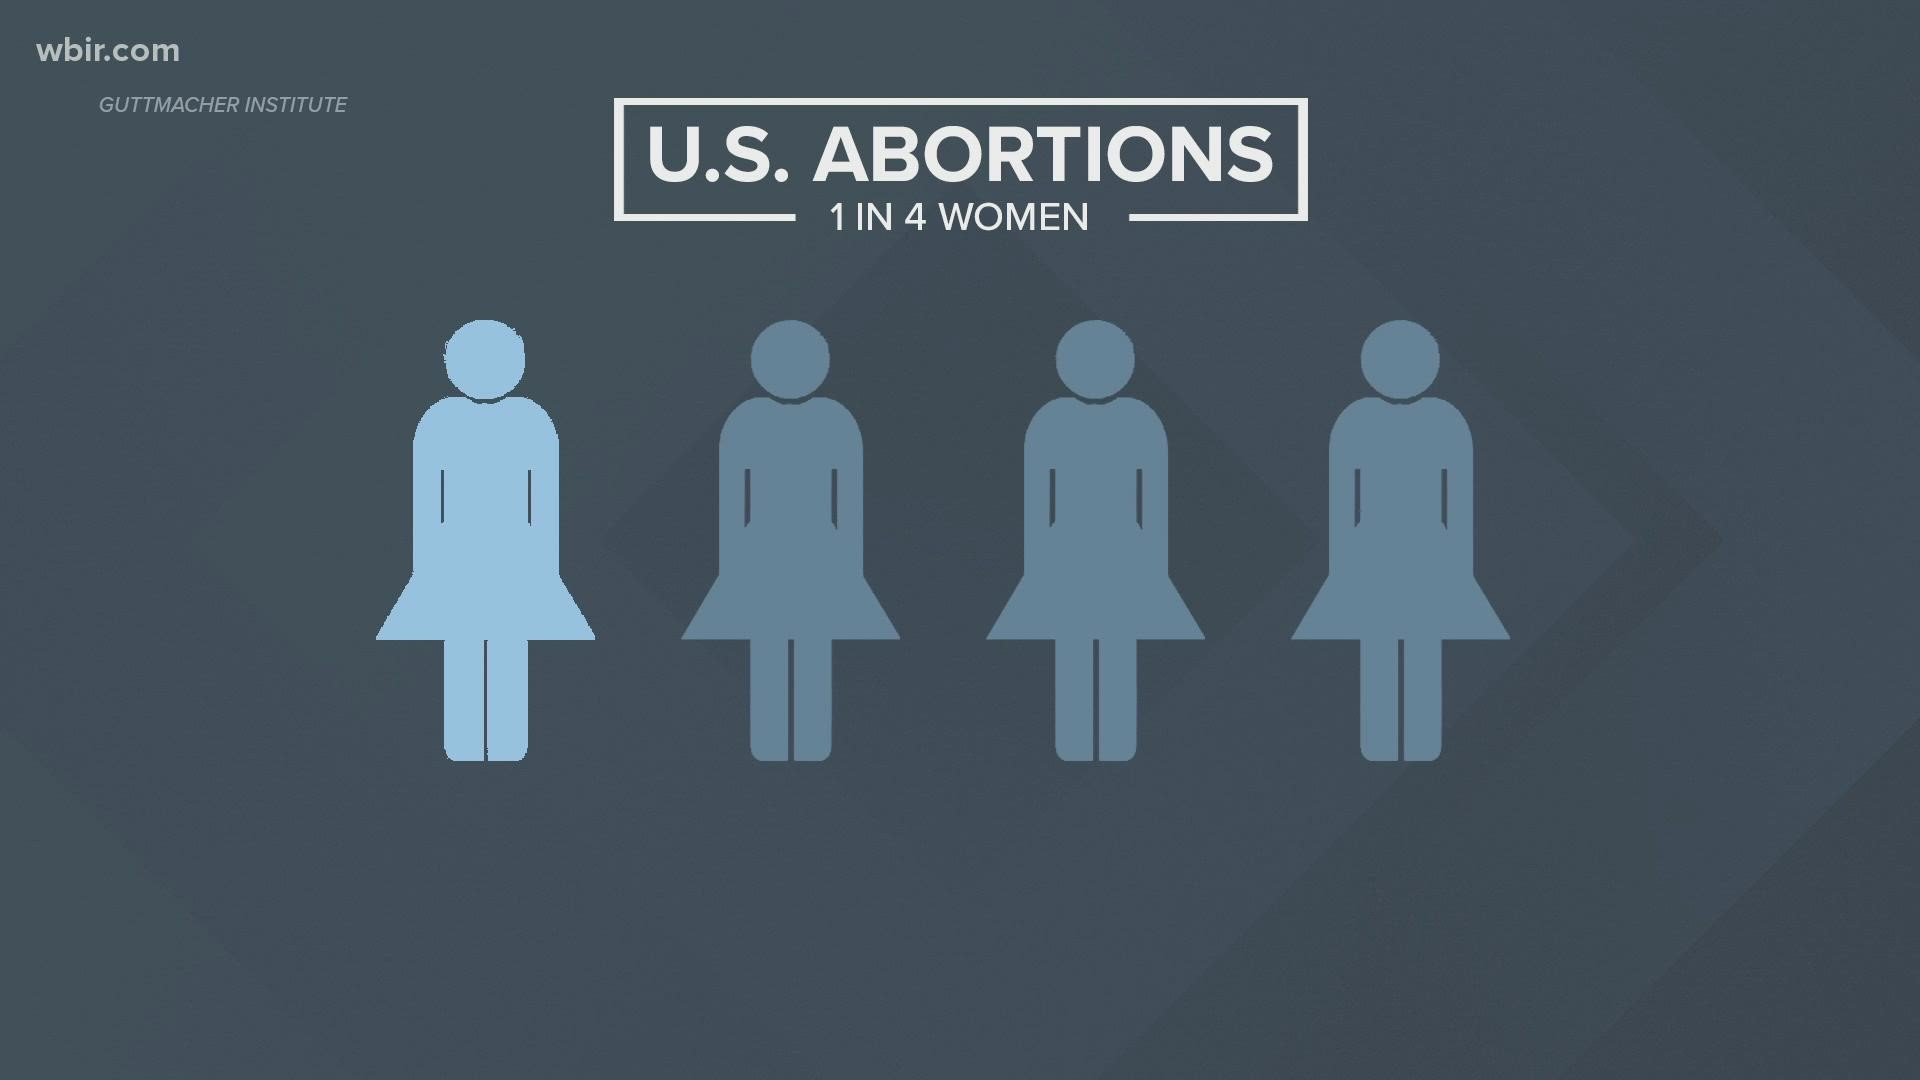 Studies show that nearly 25% of women have received abortion treatments at some point in their lives.